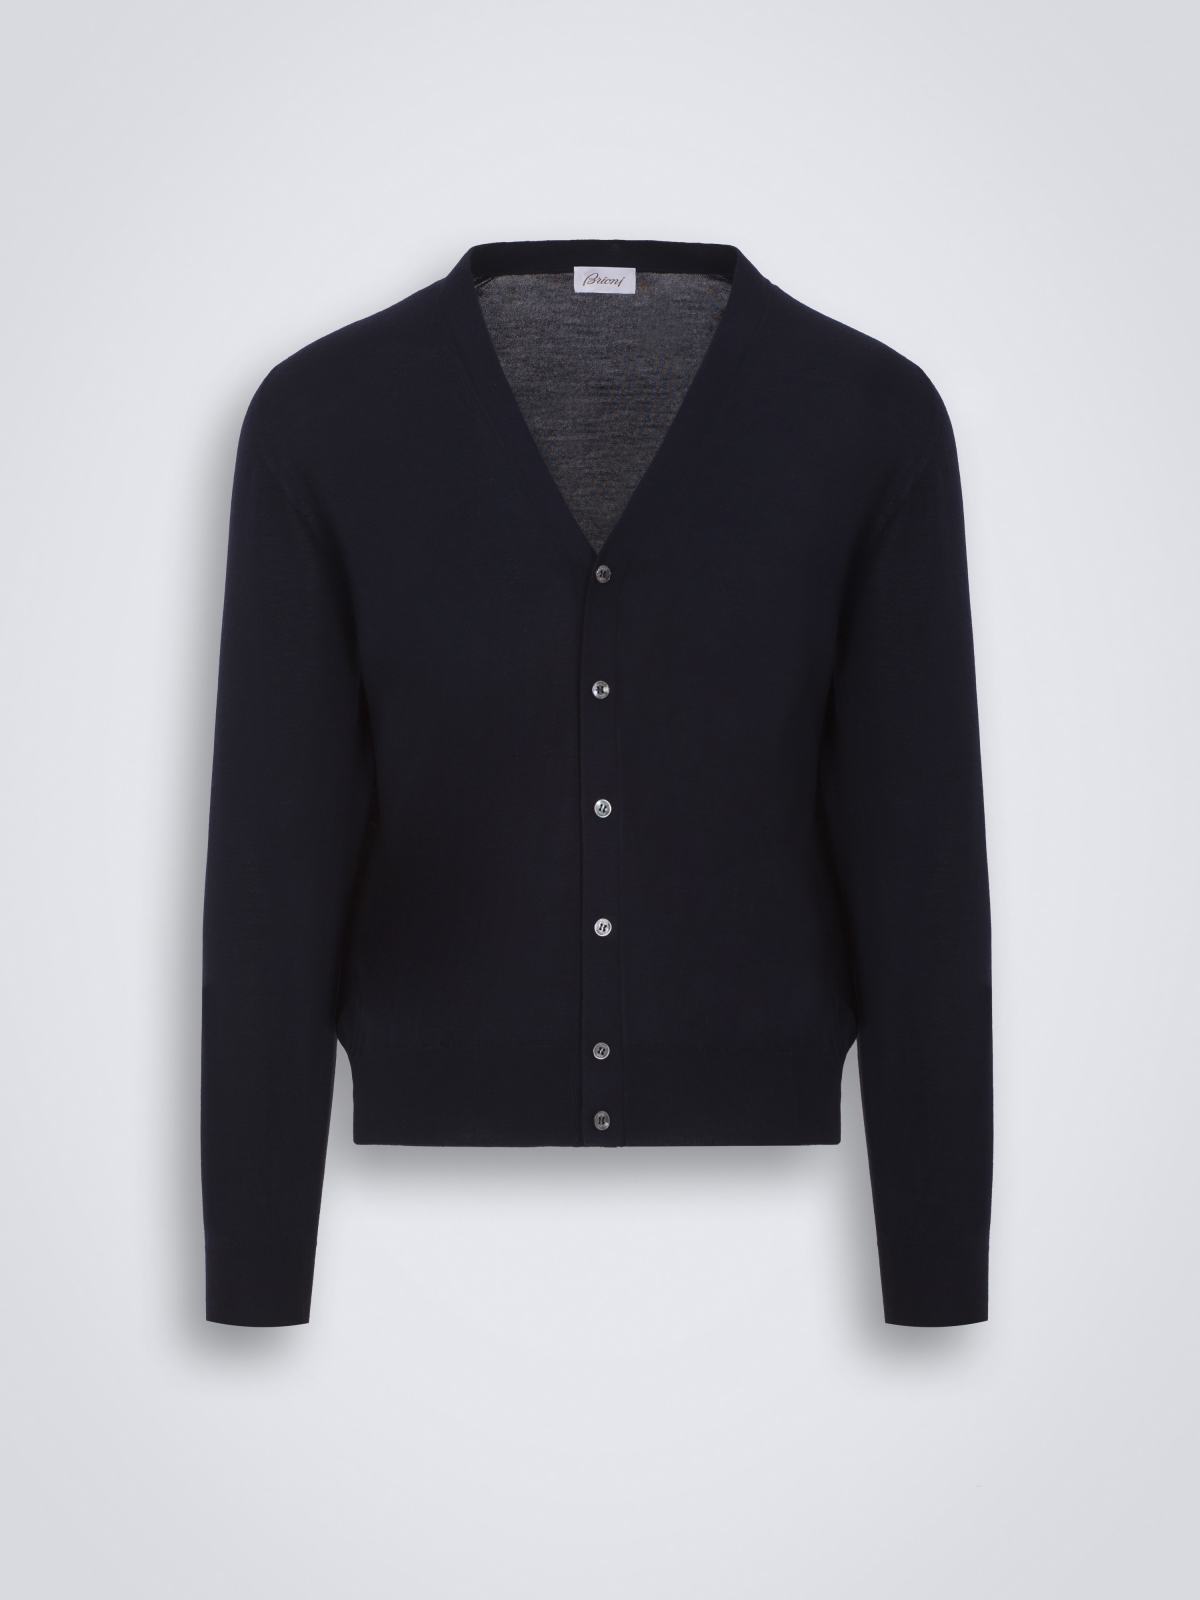 Essential navy blue cardigan | Brioni® US Official Store